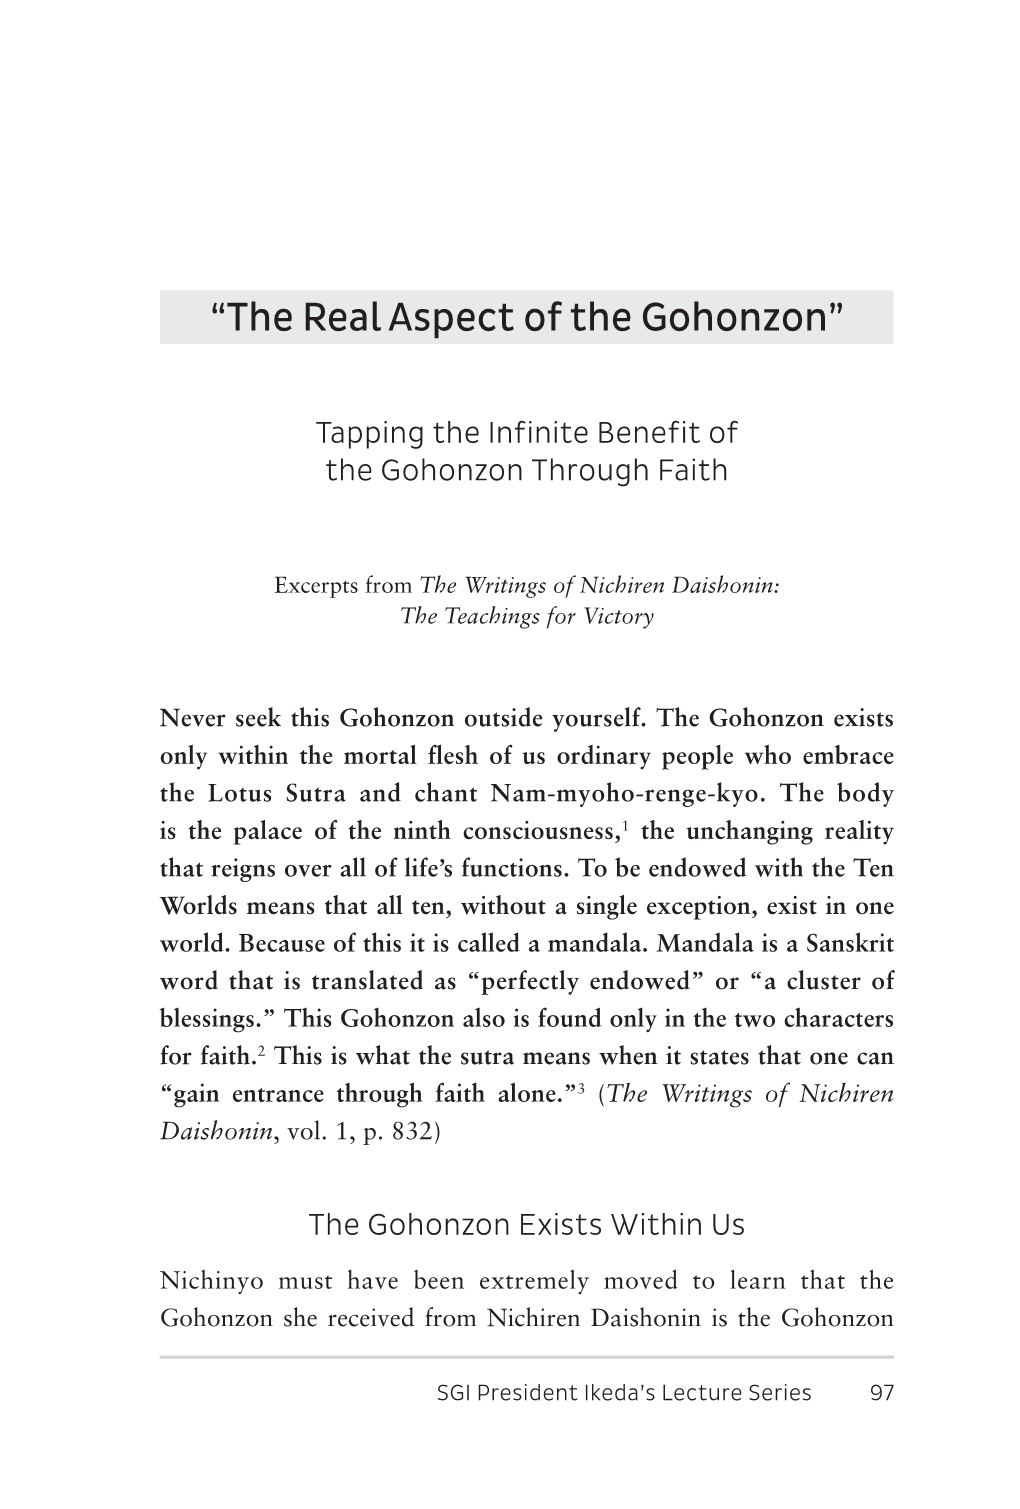 “The Real Aspect of the Gohonzon”